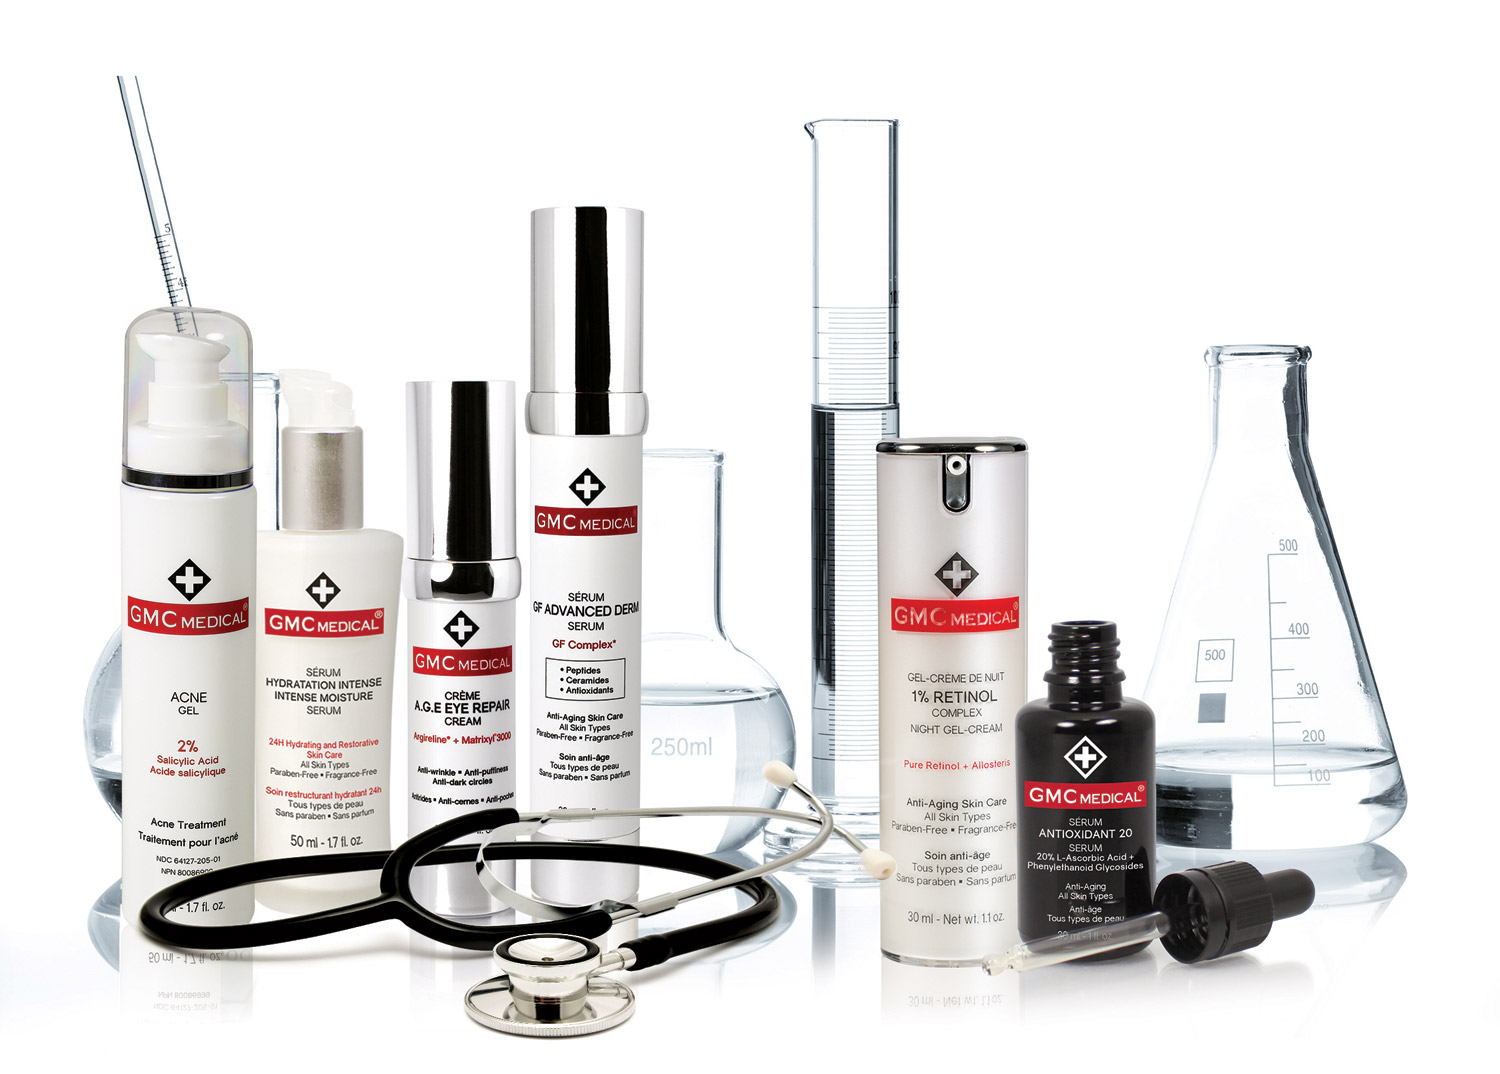 GMC Medical products